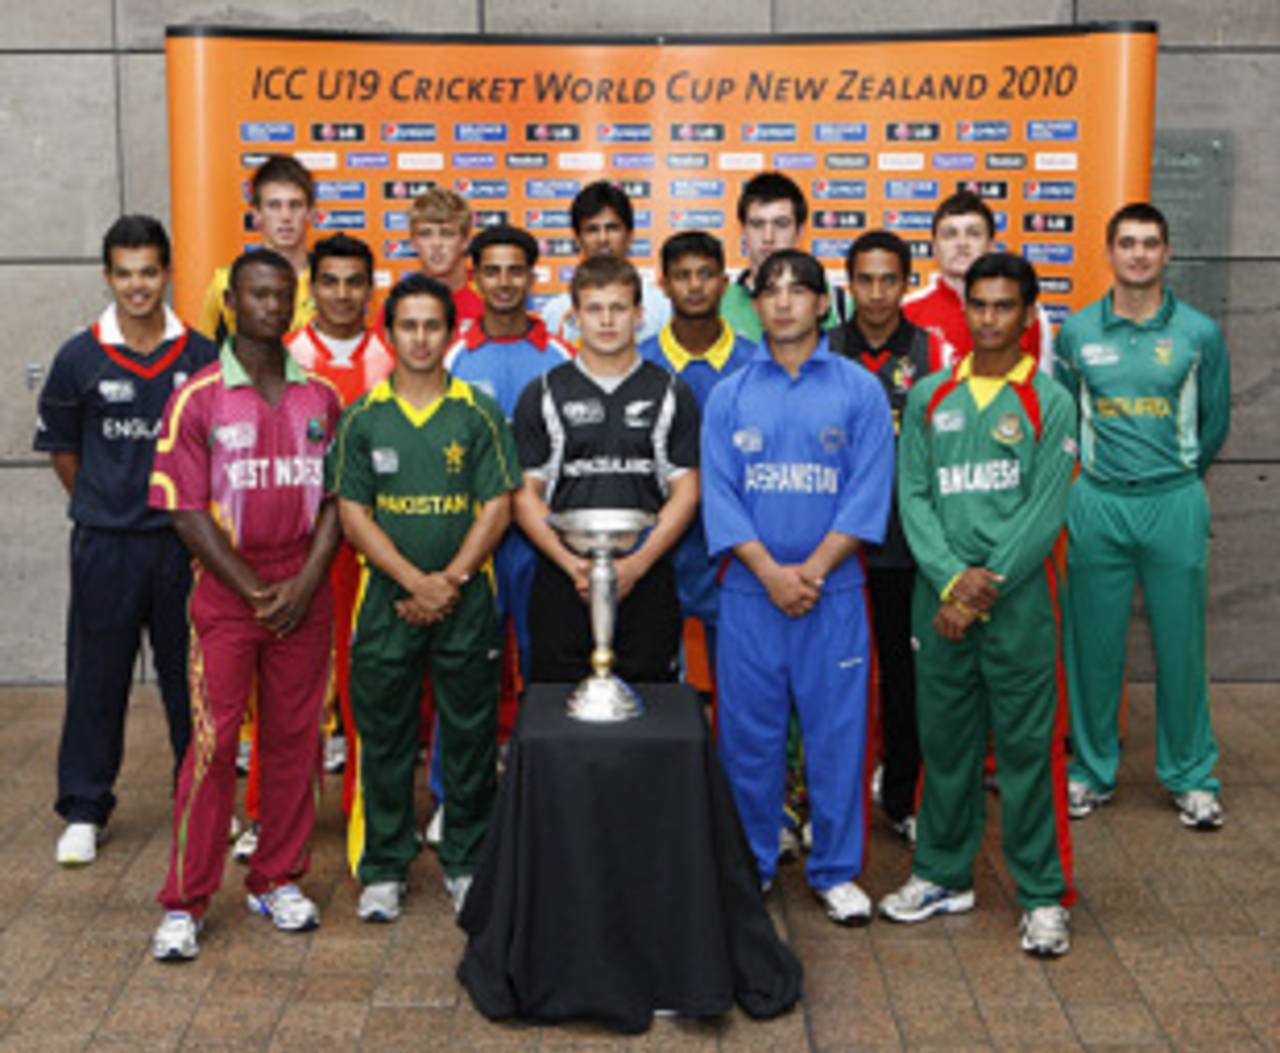 The teams line up with the trophy during the opening ceremony of the Under-19 World Cup, Christchurch, January 10, 2010